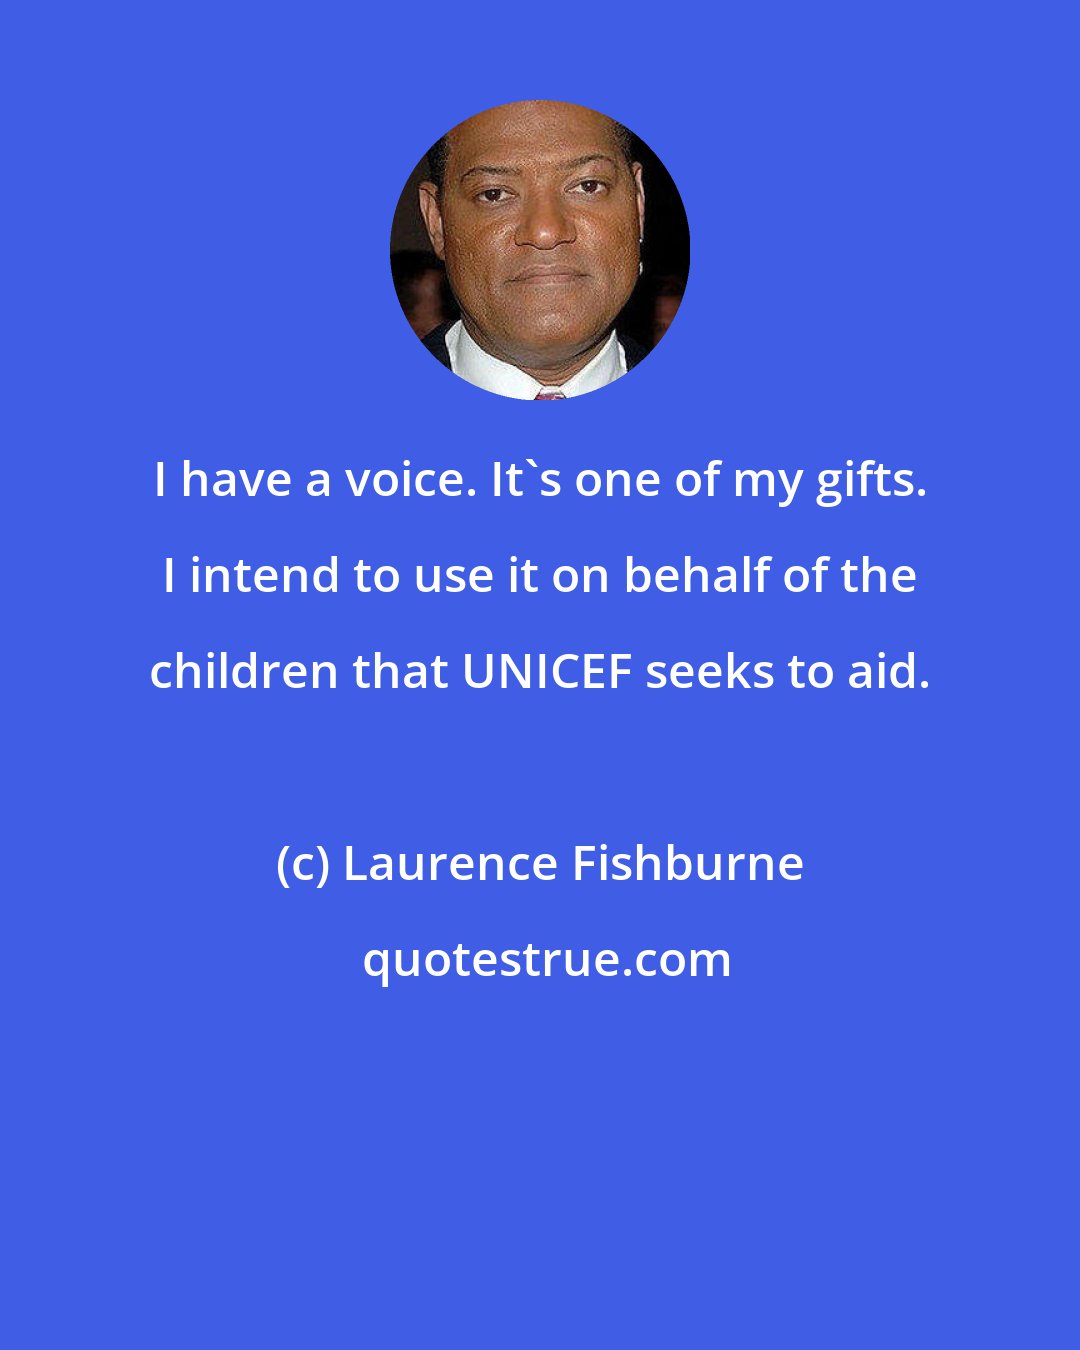 Laurence Fishburne: I have a voice. It's one of my gifts. I intend to use it on behalf of the children that UNICEF seeks to aid.